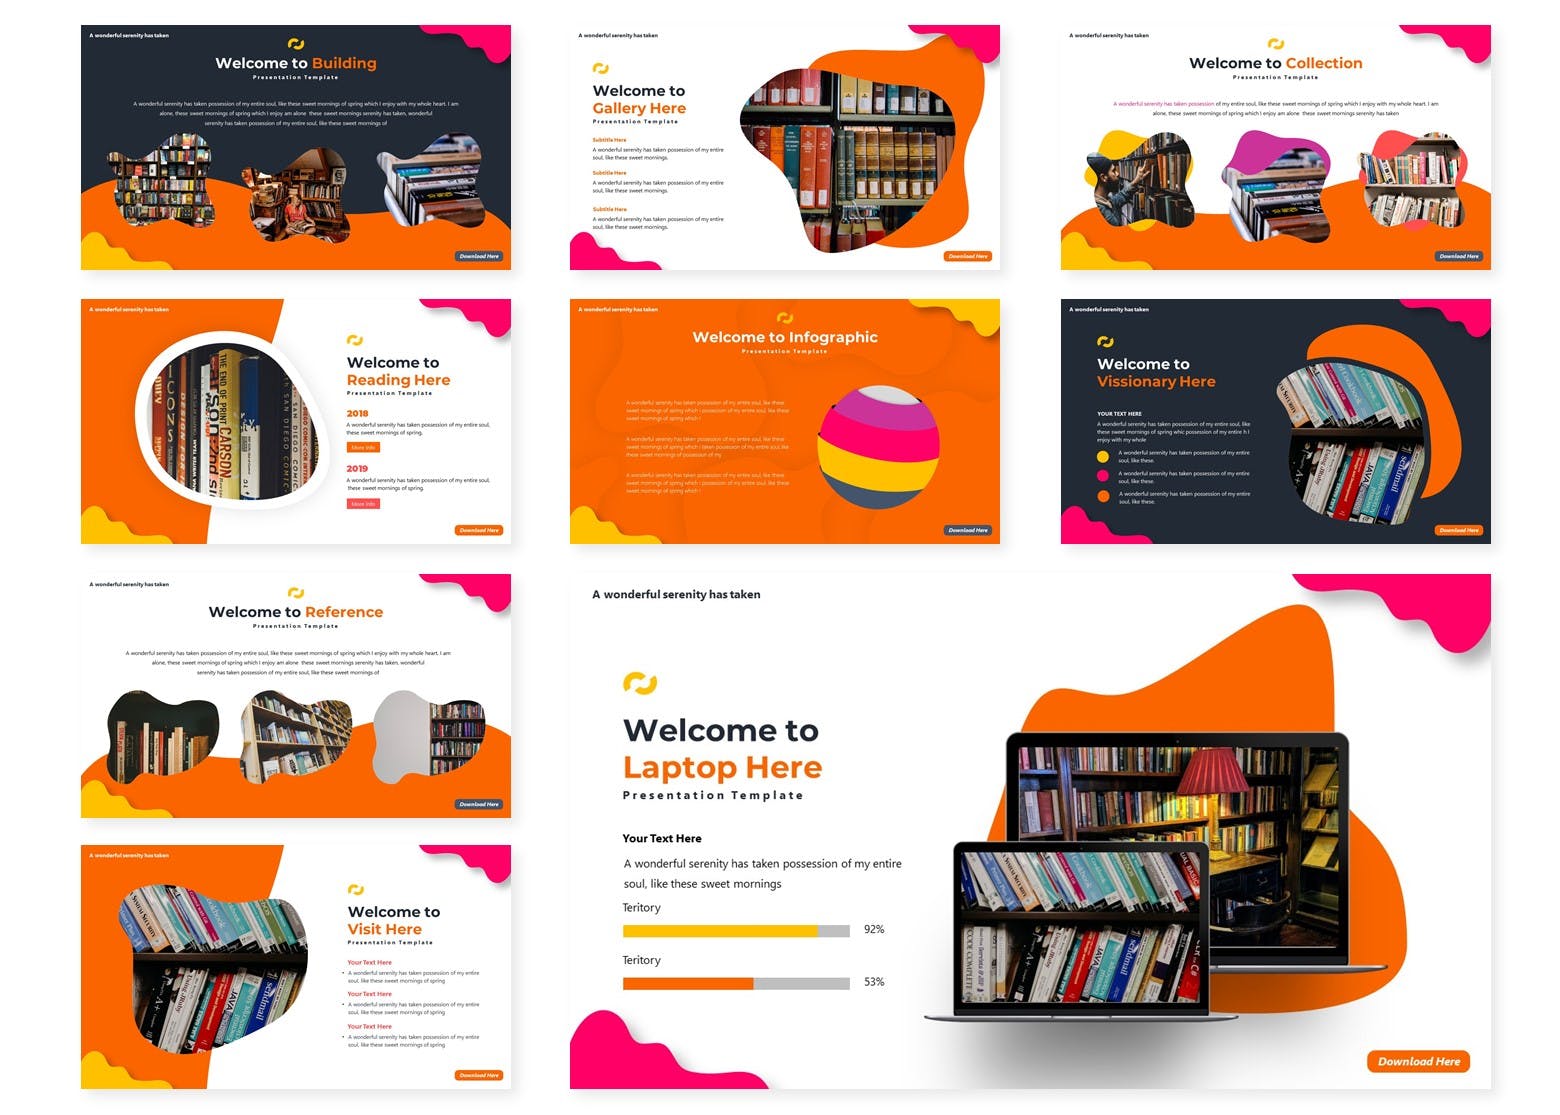 Such a modern and colorful template for your creative projects.